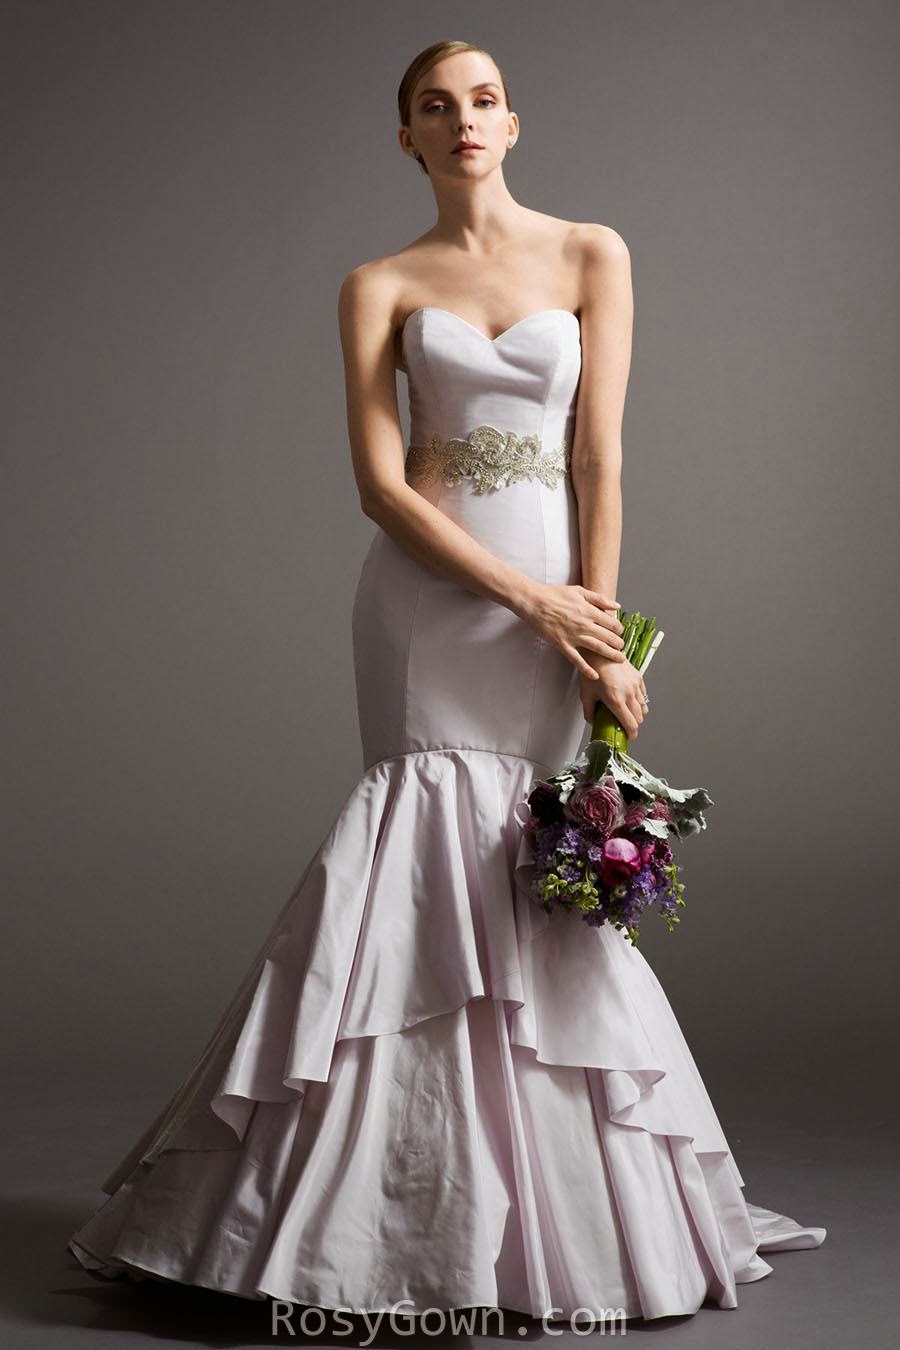 Strapless Romantic Lavender Taffeta Tiered Fit and Flare Bridal Gown-1